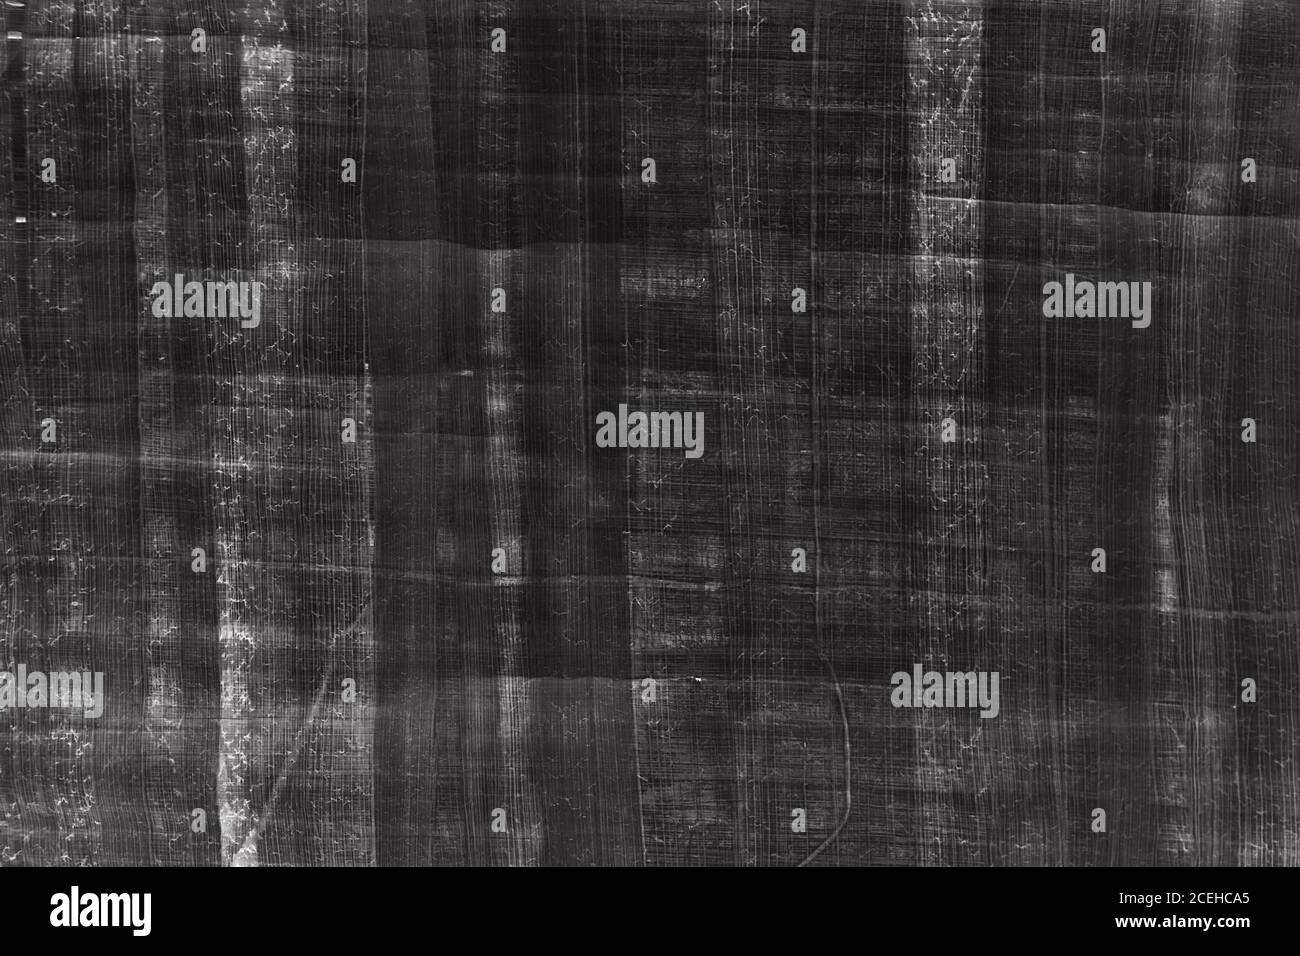 old papyrus texture background for design Stock Photo - Alamy